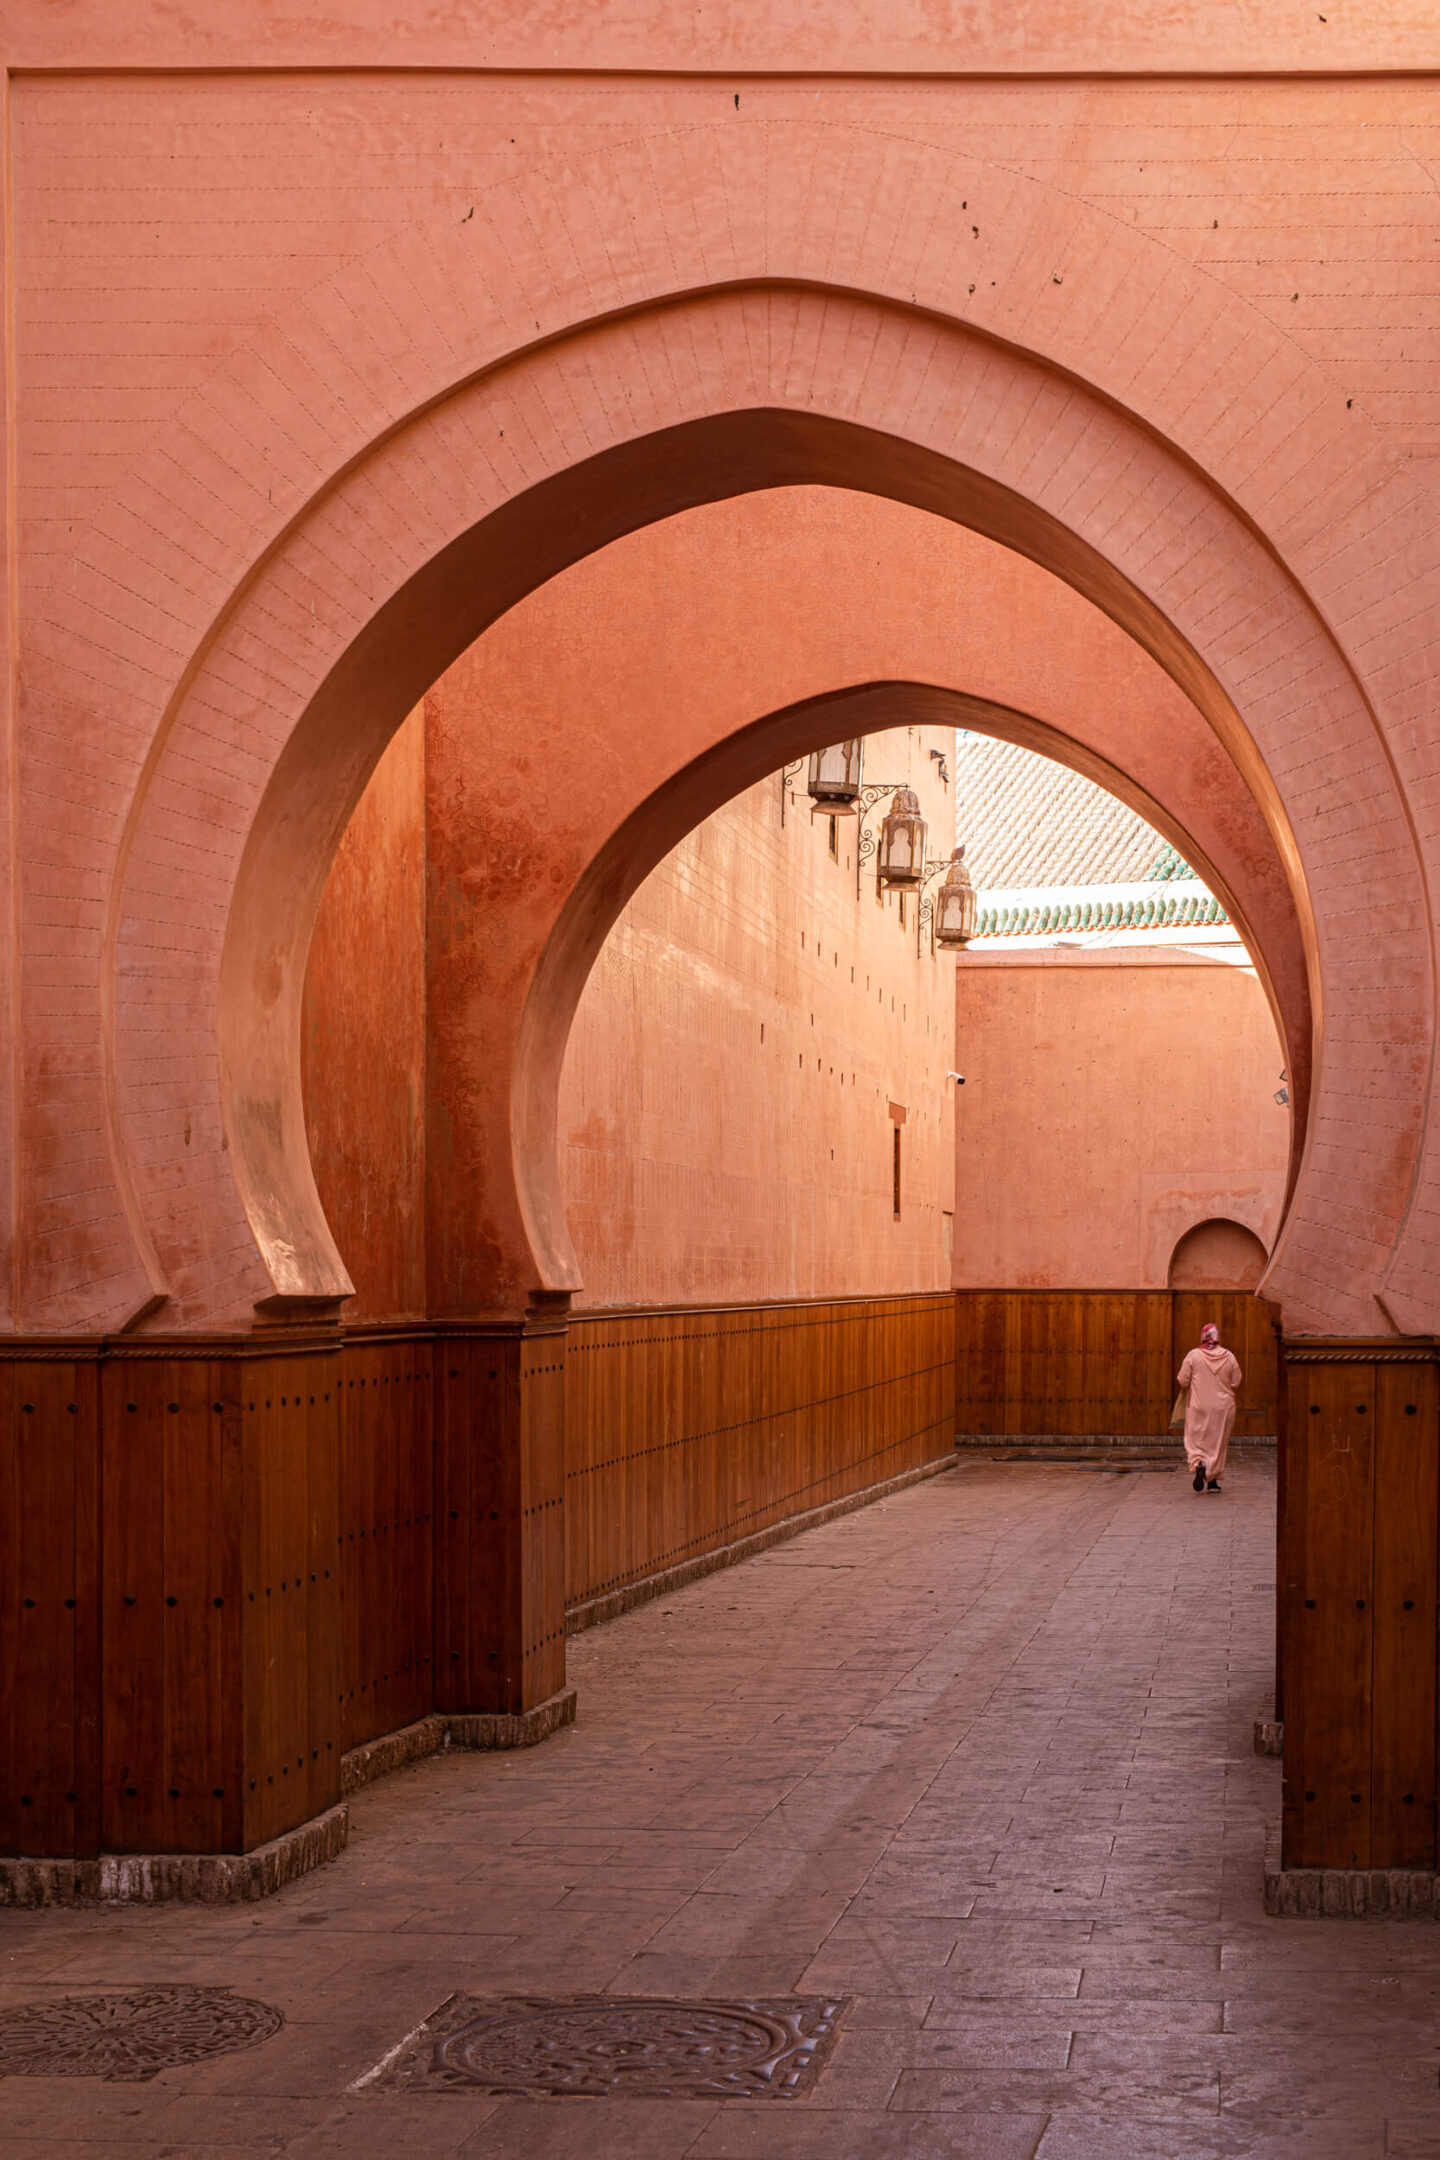 Keyhole arches in the medina in Marrakech